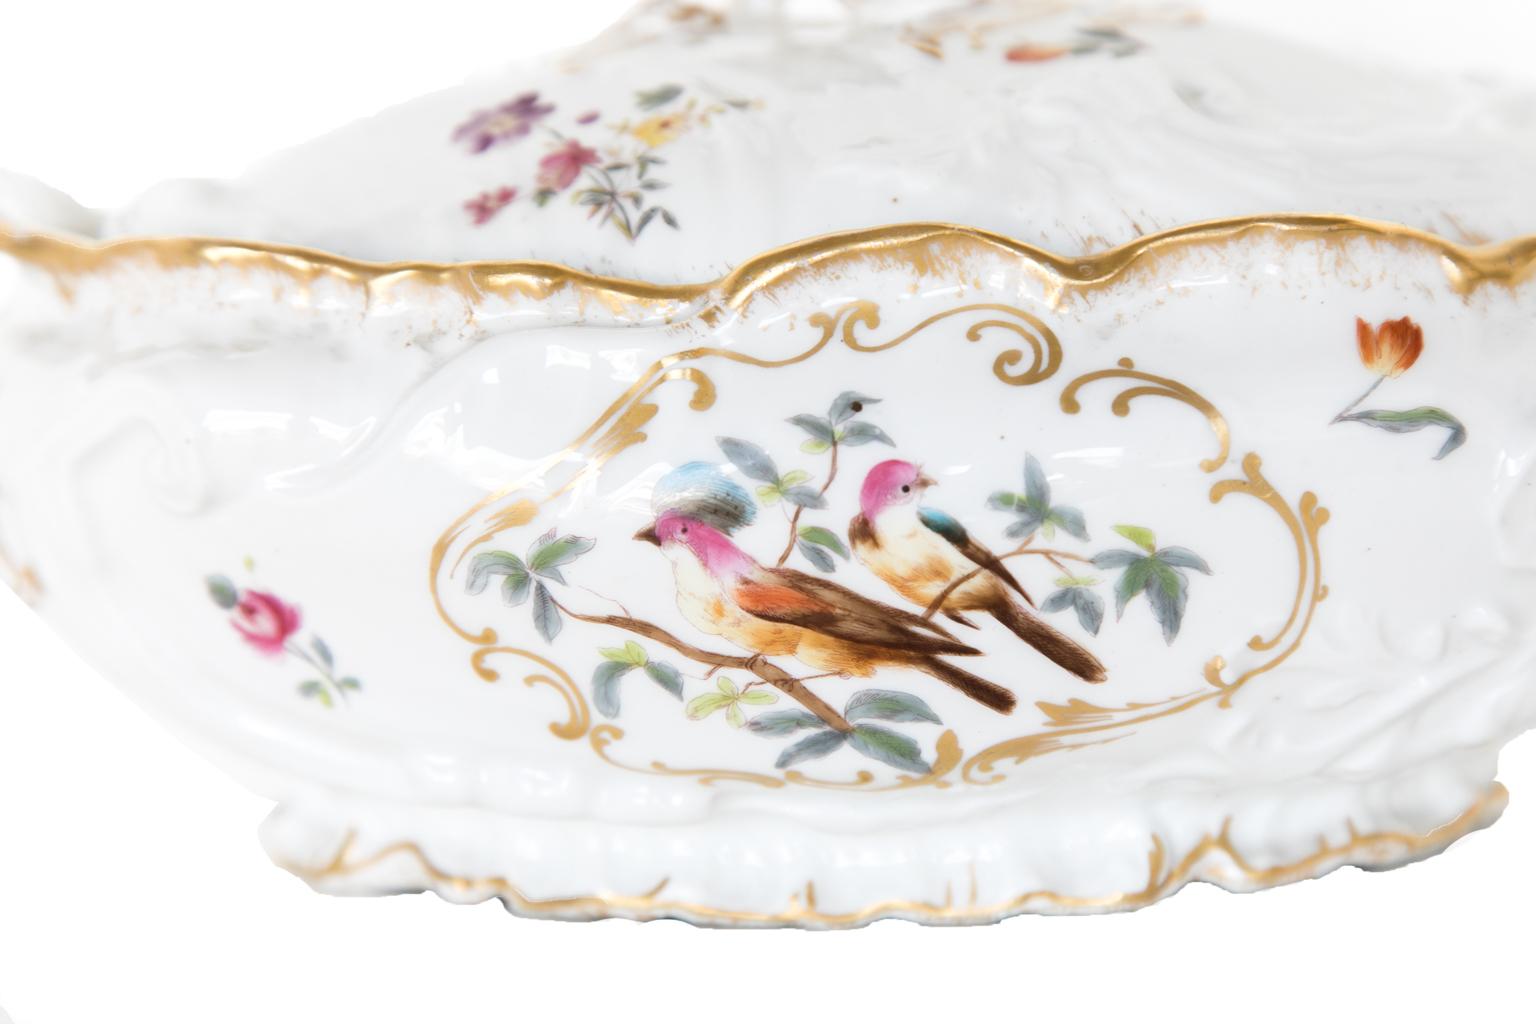 Pair of porcelain Limoges tureens, with the body of each tureen molded in high relief with floral and bird designs trimmed in gold. Each is marked: Patented November 11, 1890. (Will take picture of the bottom and send).